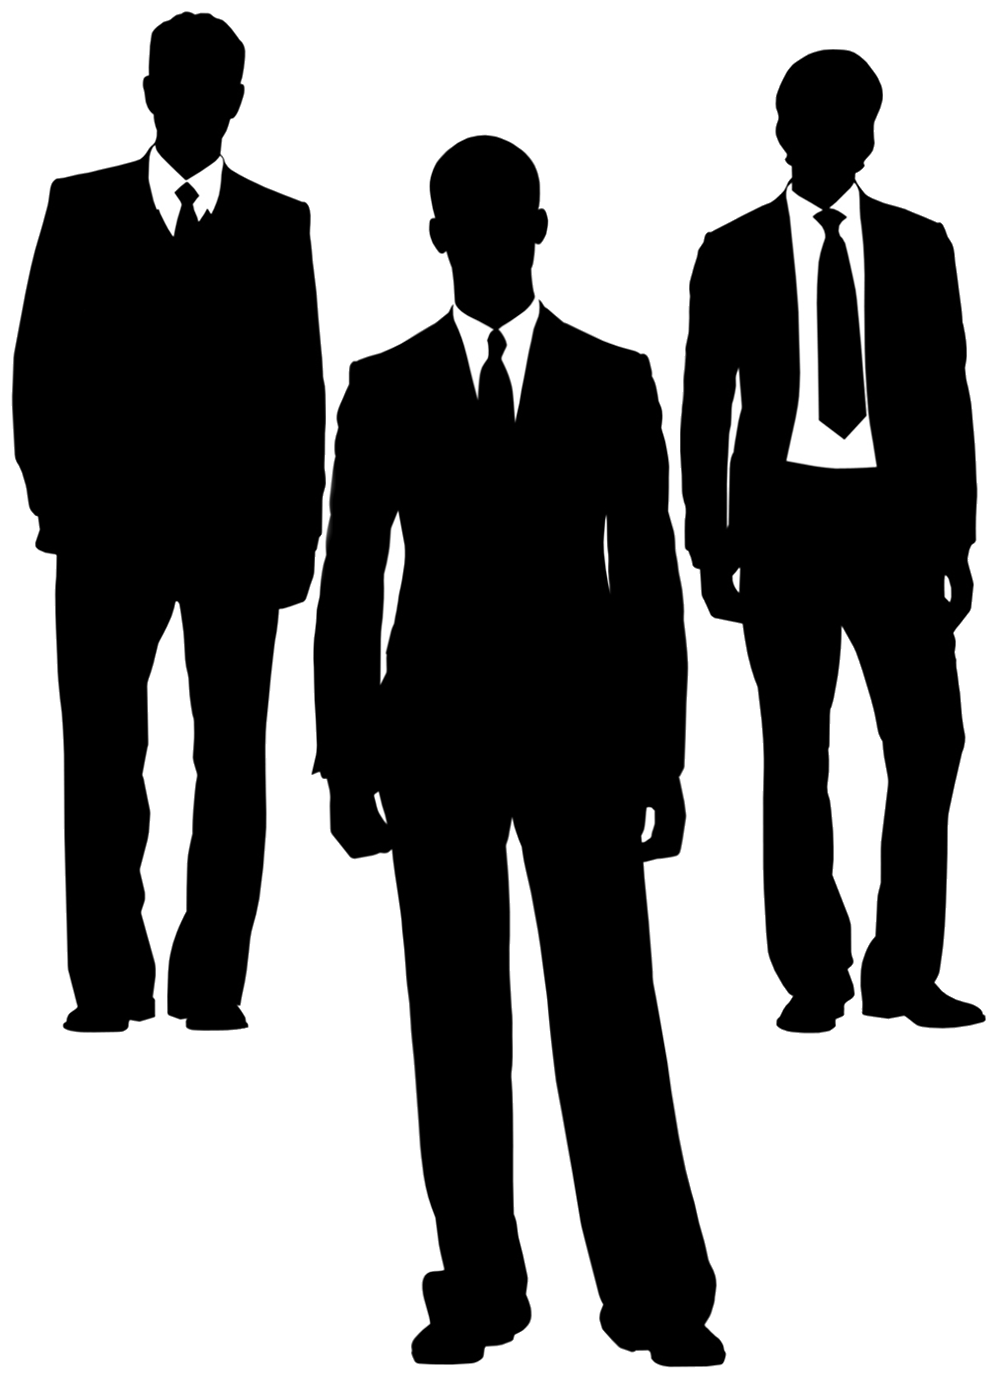 A Group Of Men In Suits